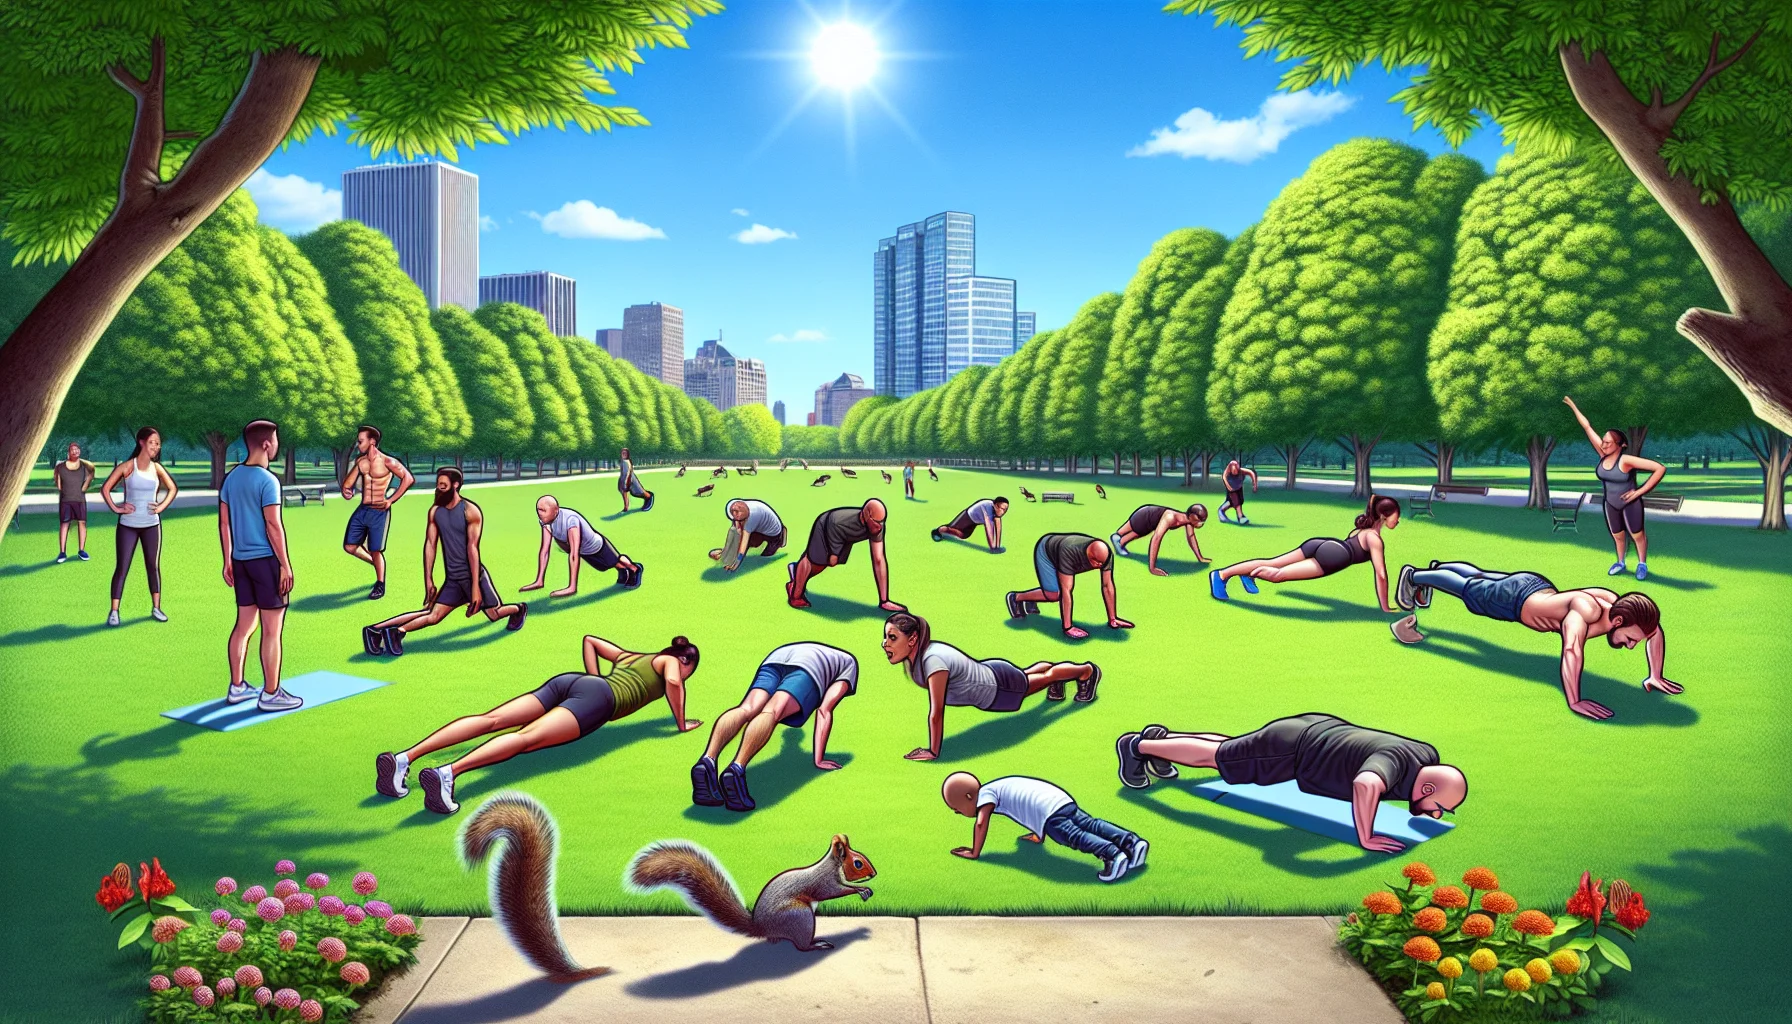 Create a satirical scenario in a public park on a sunny day where a group of individuals from various descents like Hispanic, Middle-Eastern, and African descent are engaging in the calisthenics push workout. The park is beautifully landscaped with vibrant green trees and blooming flowers with a clear blue sky overhead. Make sure to include a variety of humorous elements, such as a squirrel mimicry of the humans or a tree branch flexing as if doing pushups too. Remember to show the individuals having a lot of fun to encourage viewers that exercising can be enjoyable and fulfilling. The image should have a cartoonish, lighthearted vibe yet realistic representation of the workout and surroundings.